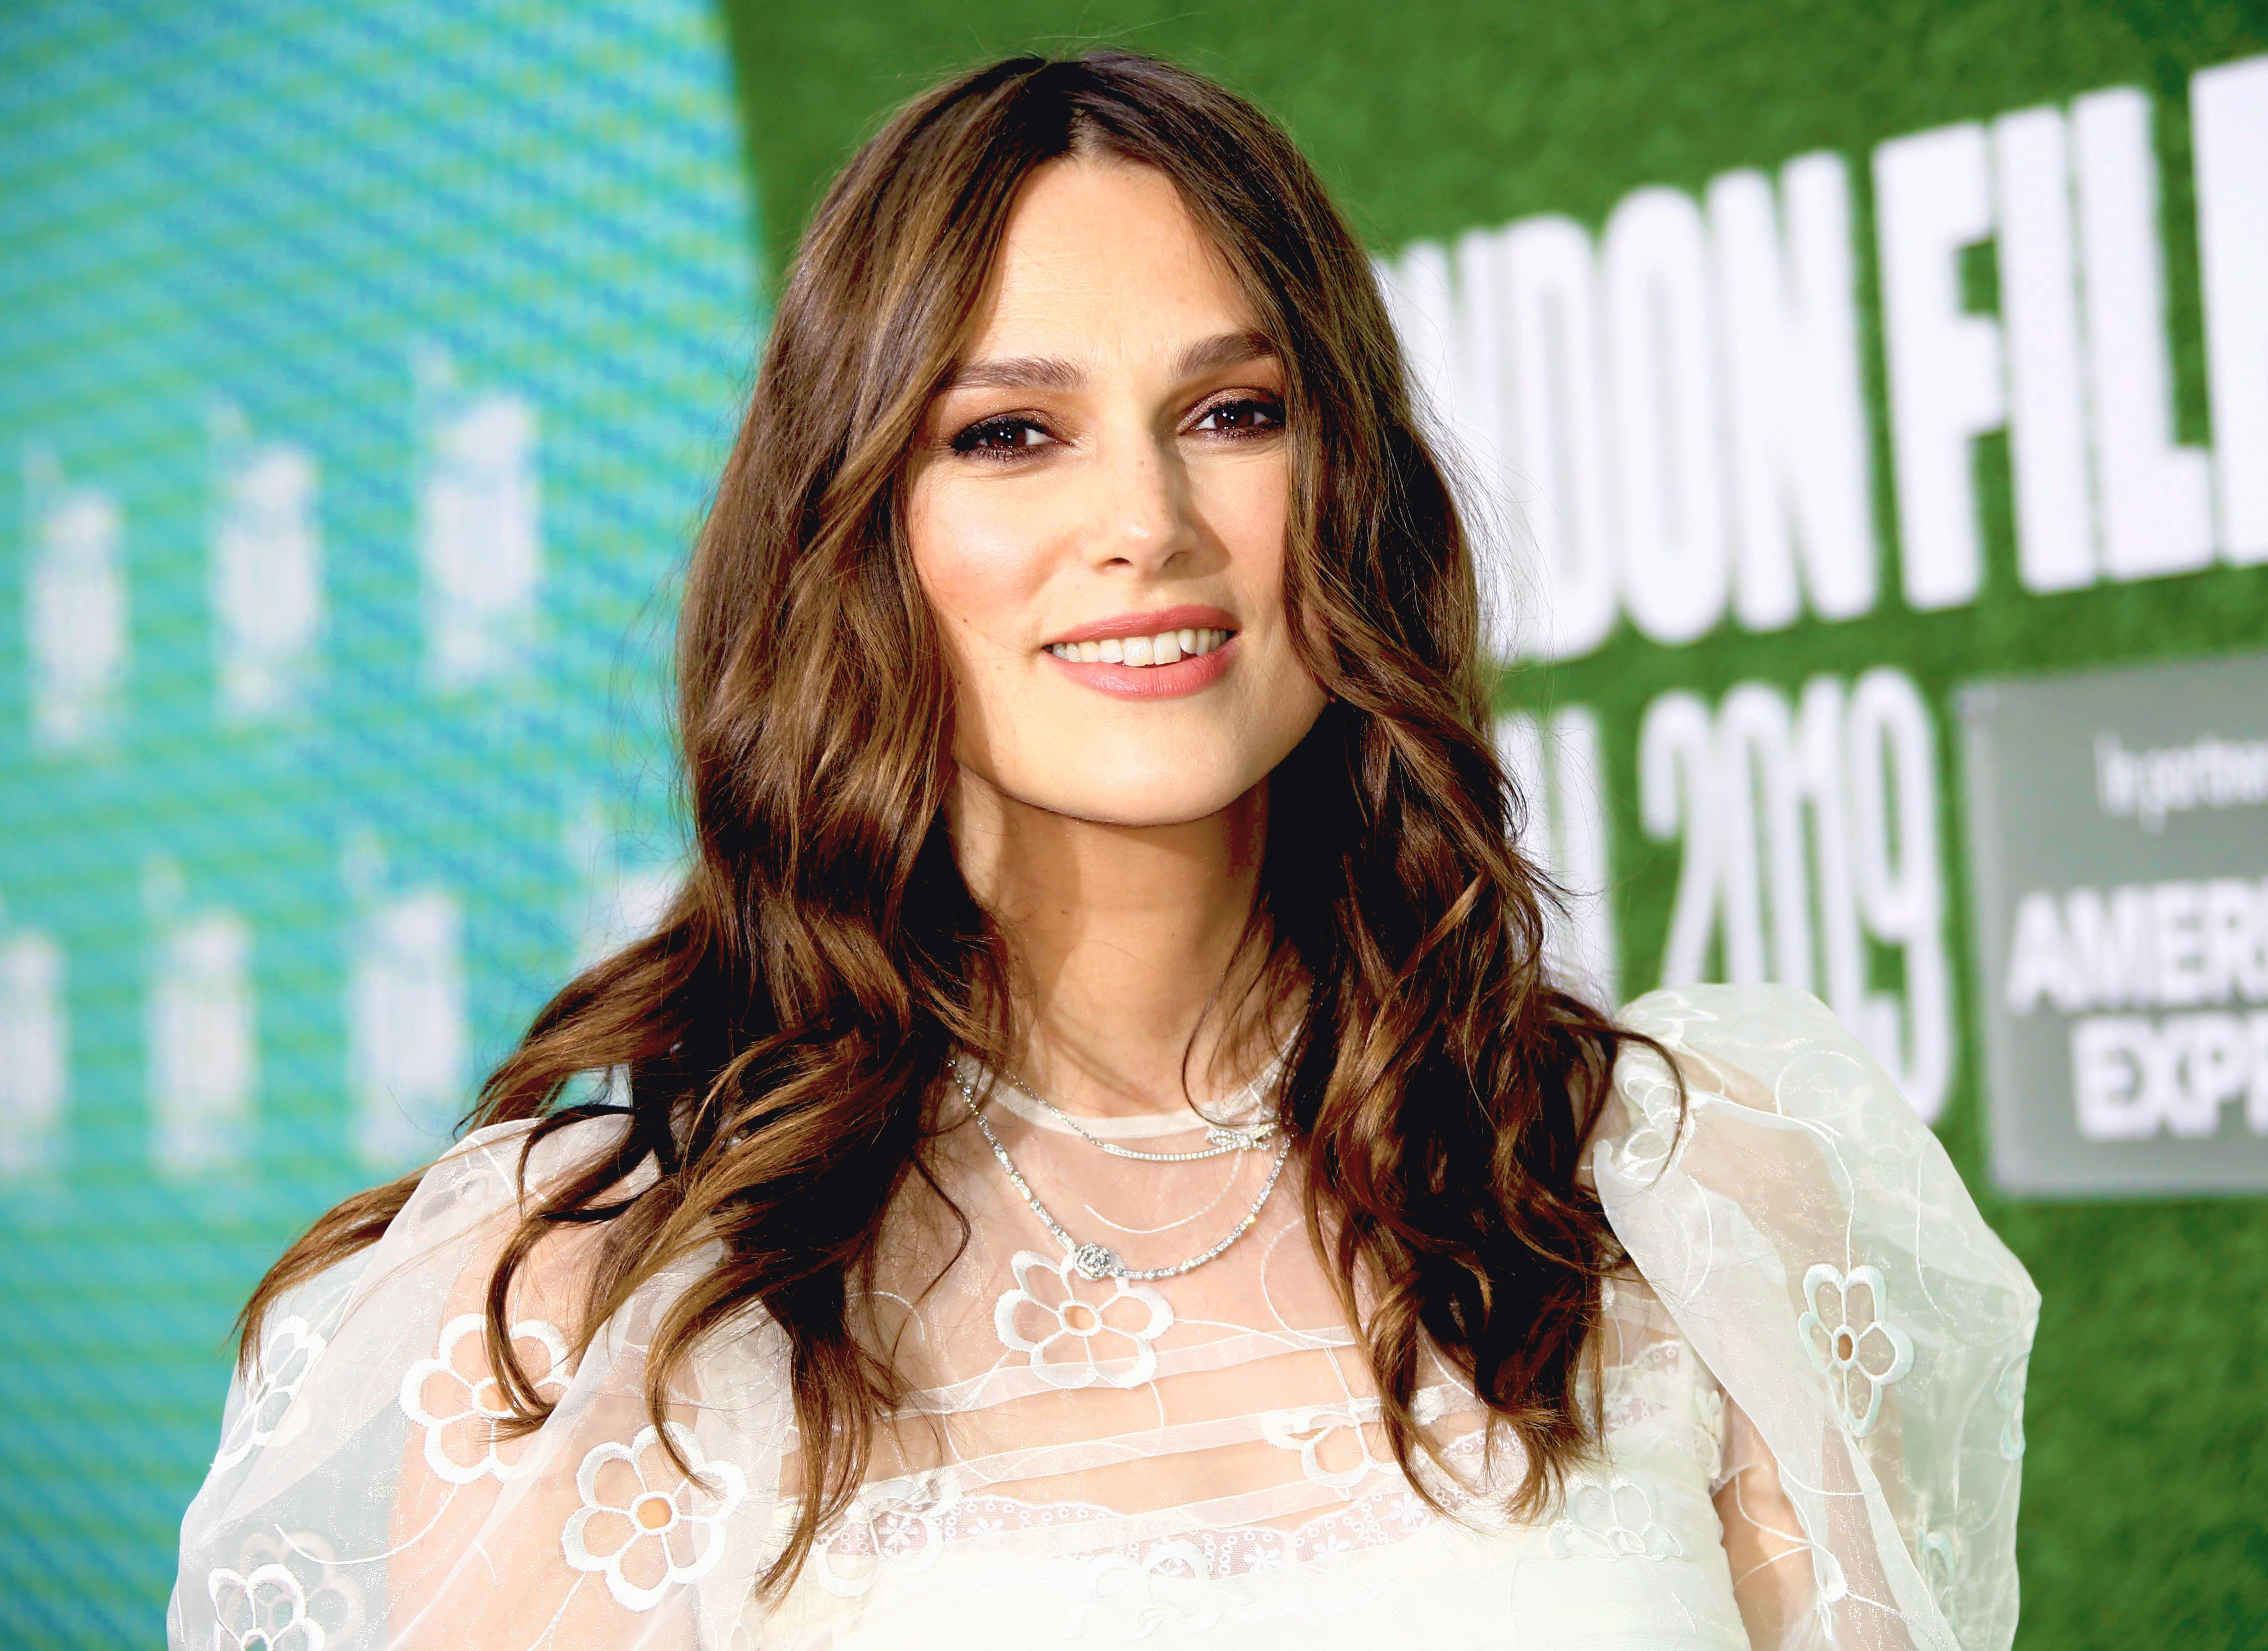 Keira Knightley Celebrity Porn - Keira Knightley Refuses to Do Nude Scenes After Welcoming 2 Kids